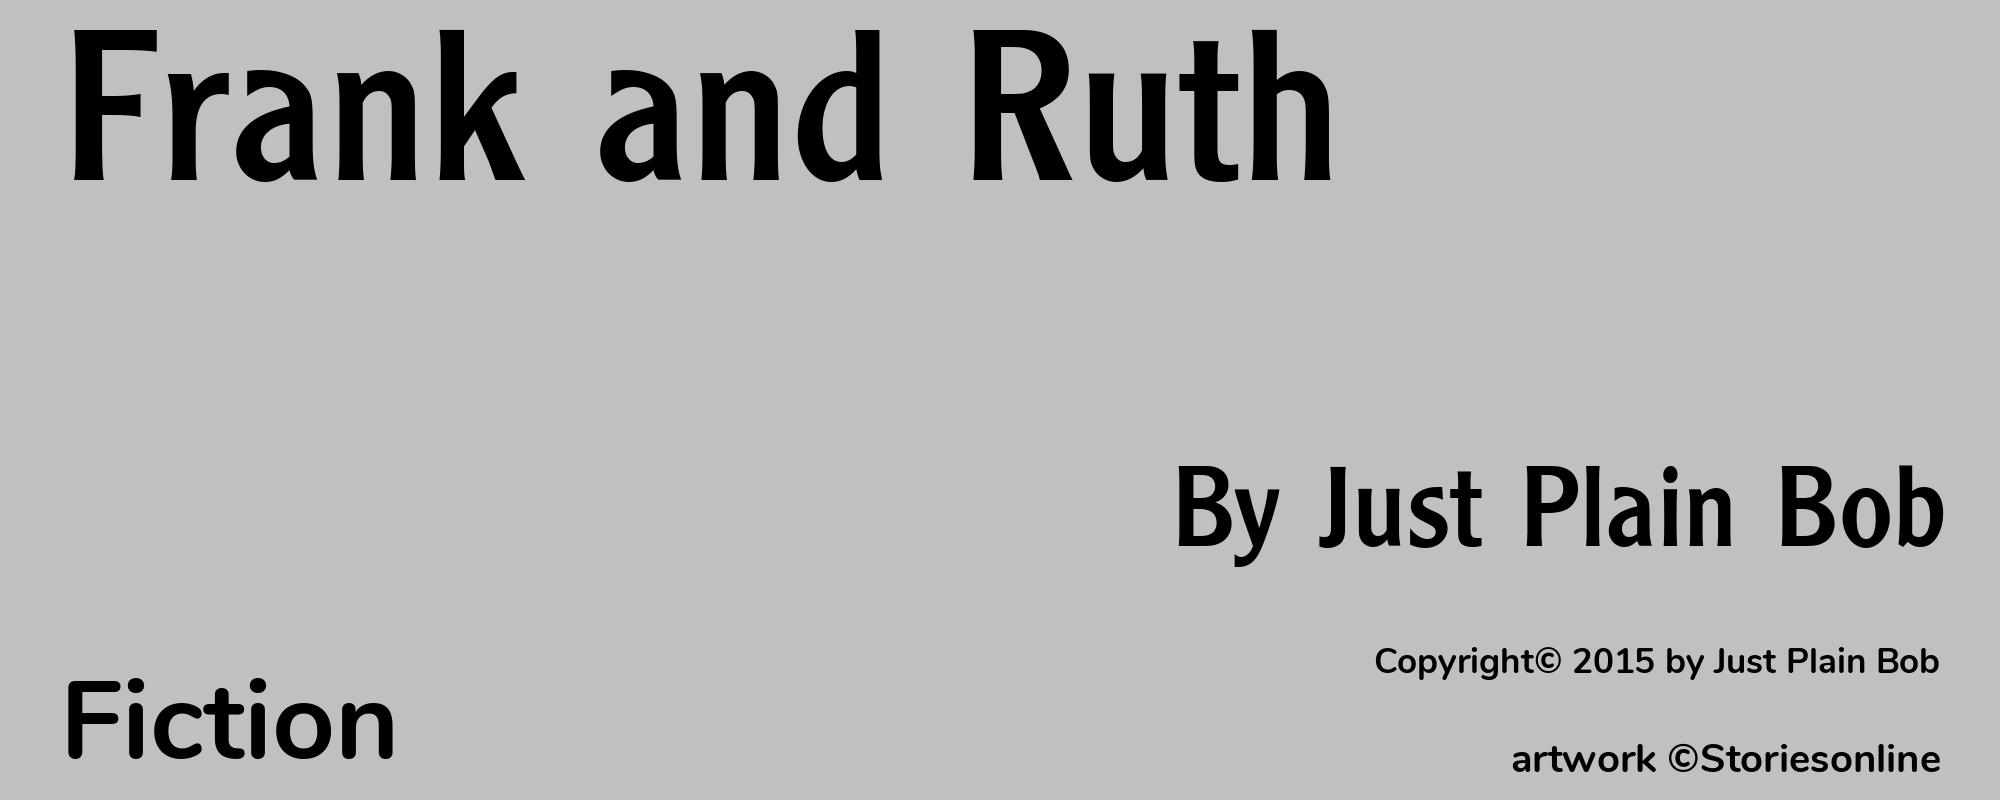 Frank and Ruth - Cover